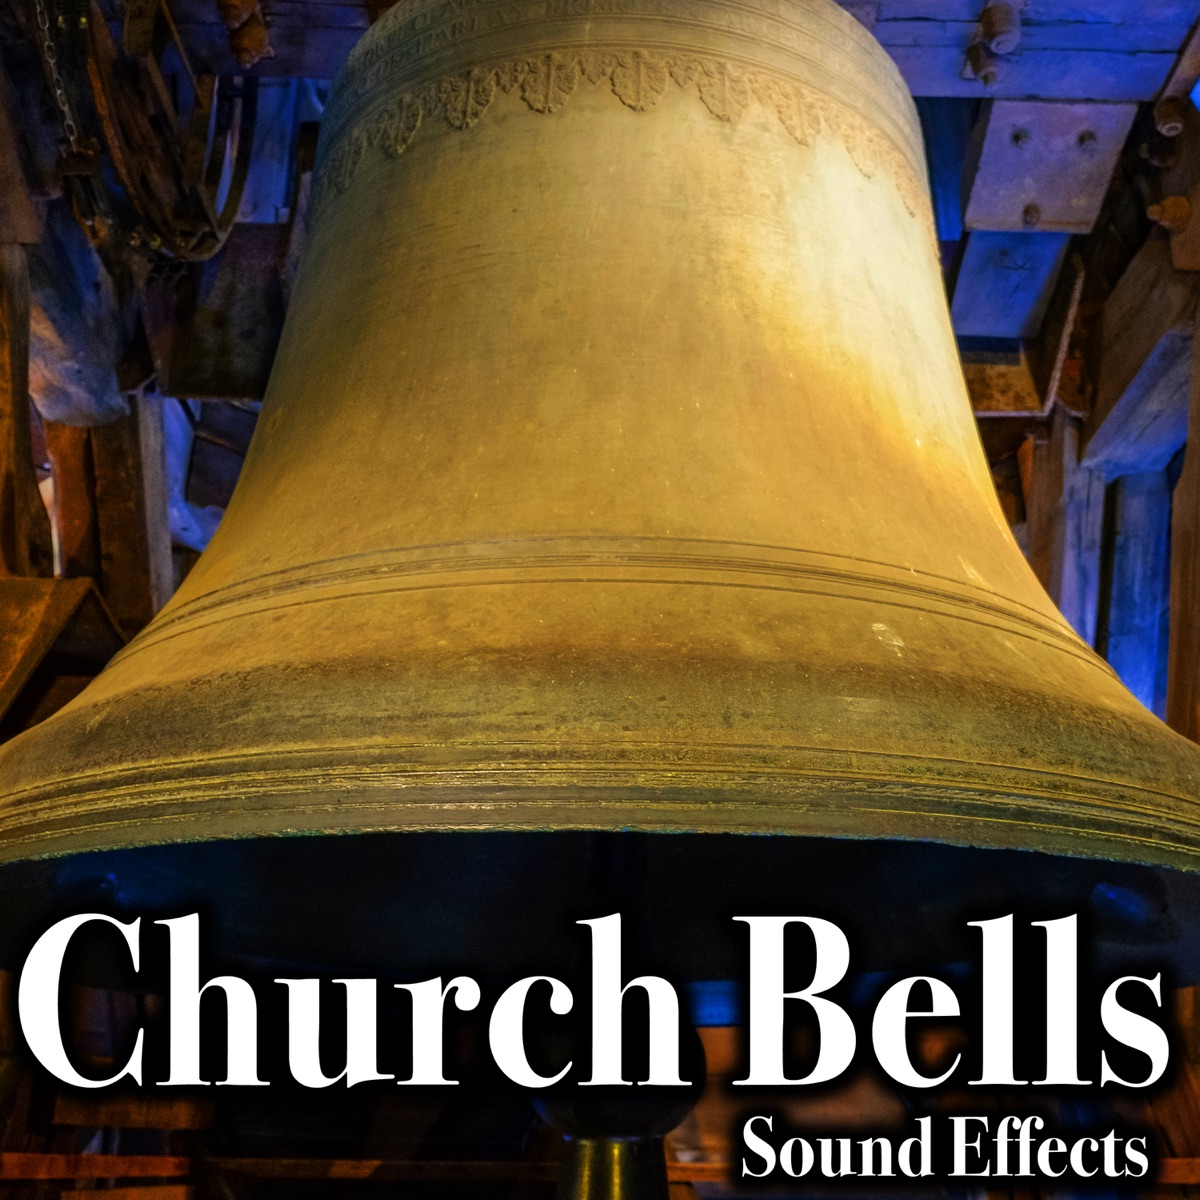 Church Bells Sound Effects by Sound Ideas on Apple Music